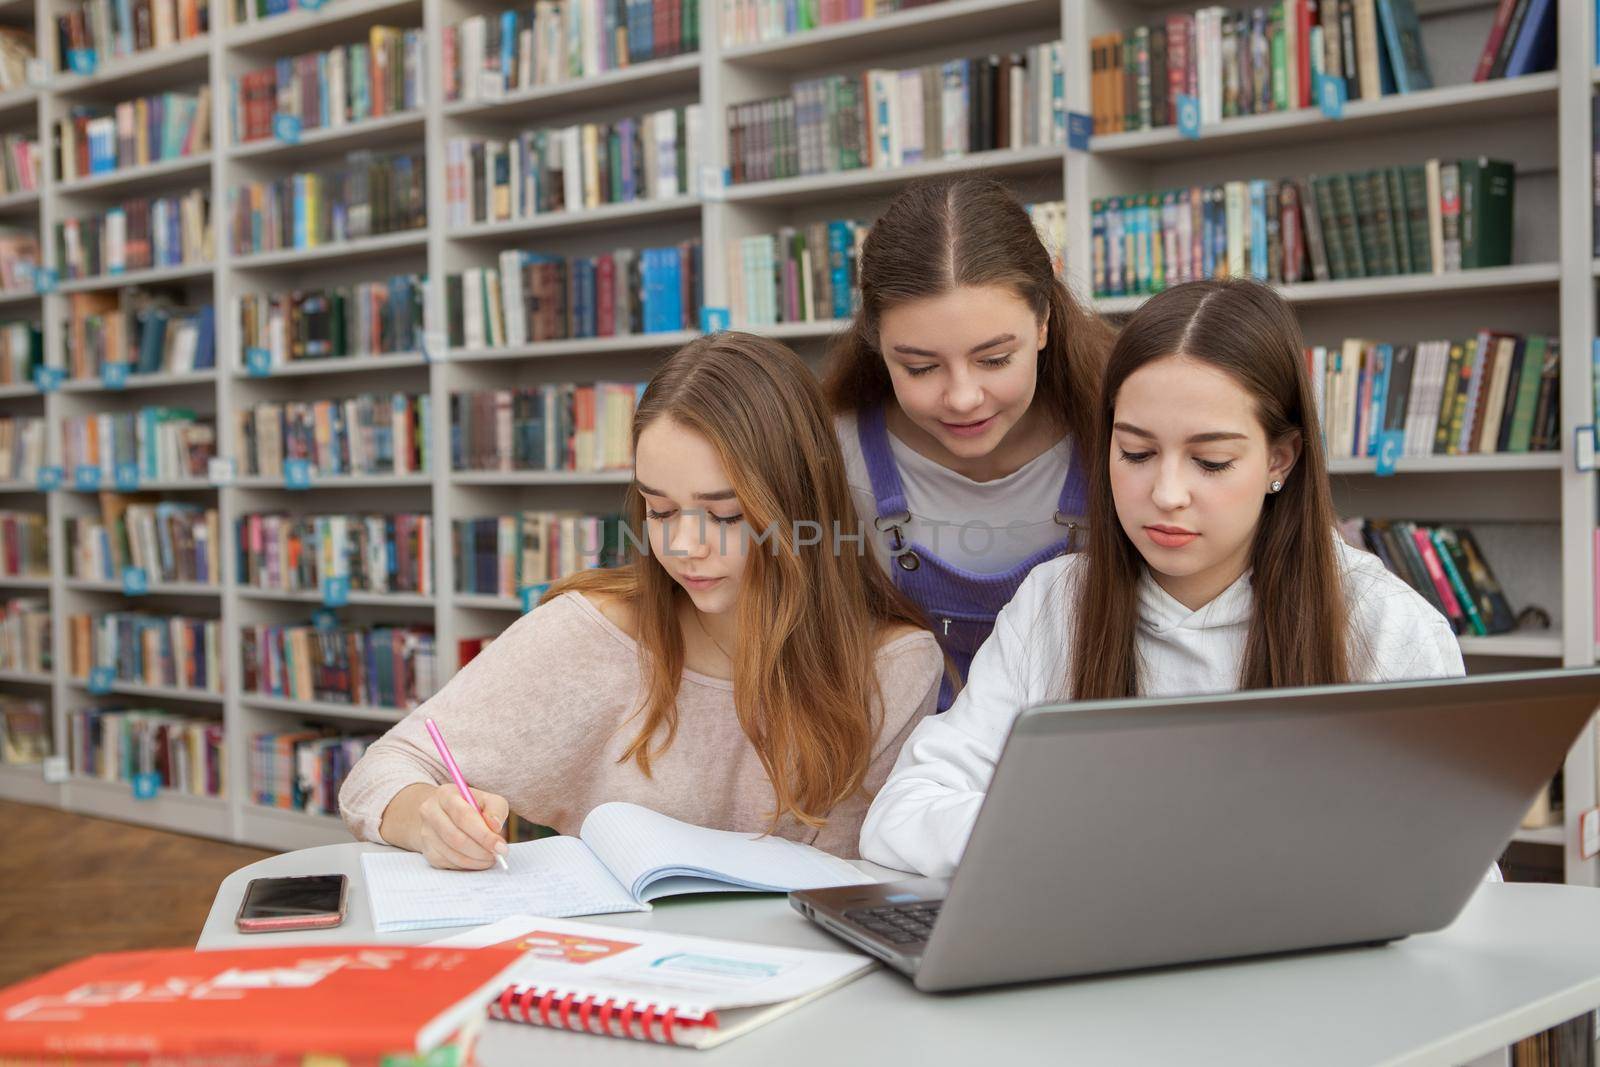 Three teenage girls studying together at school library, copy space